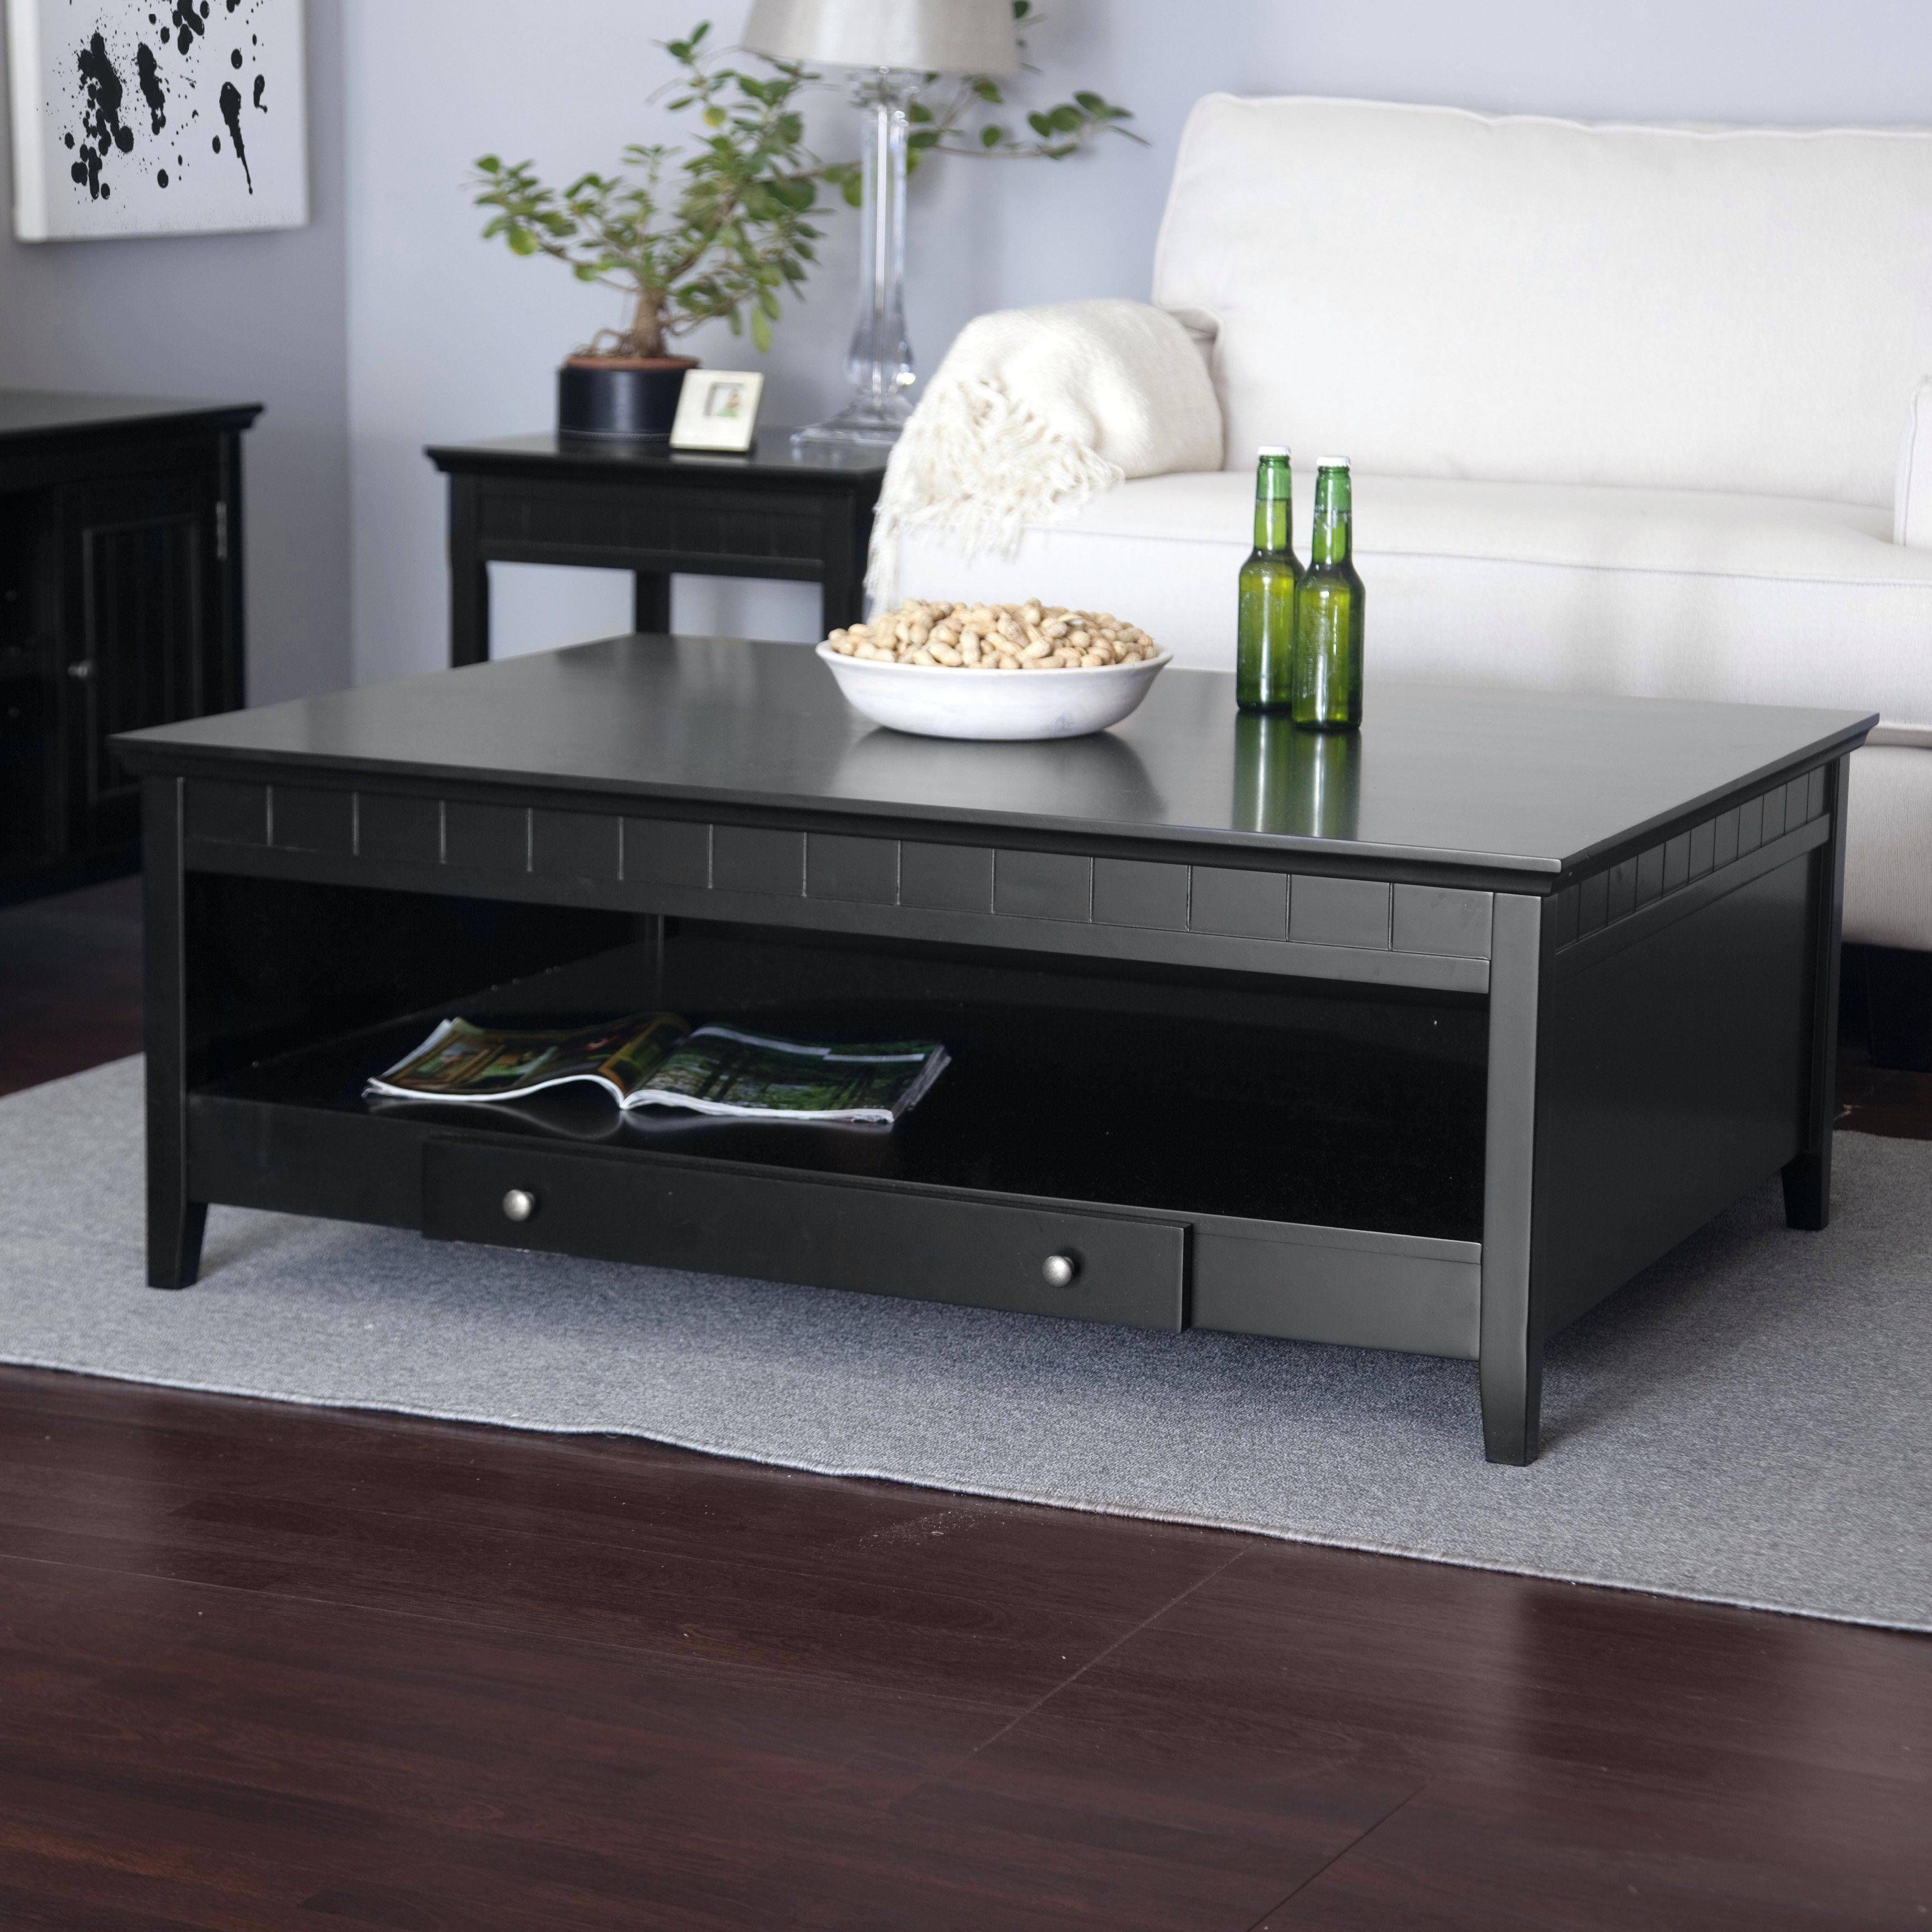 Coffee Table: Square Coffee Table Storage Large Round Coffee Within Square Storage Coffee Tables (View 16 of 30)